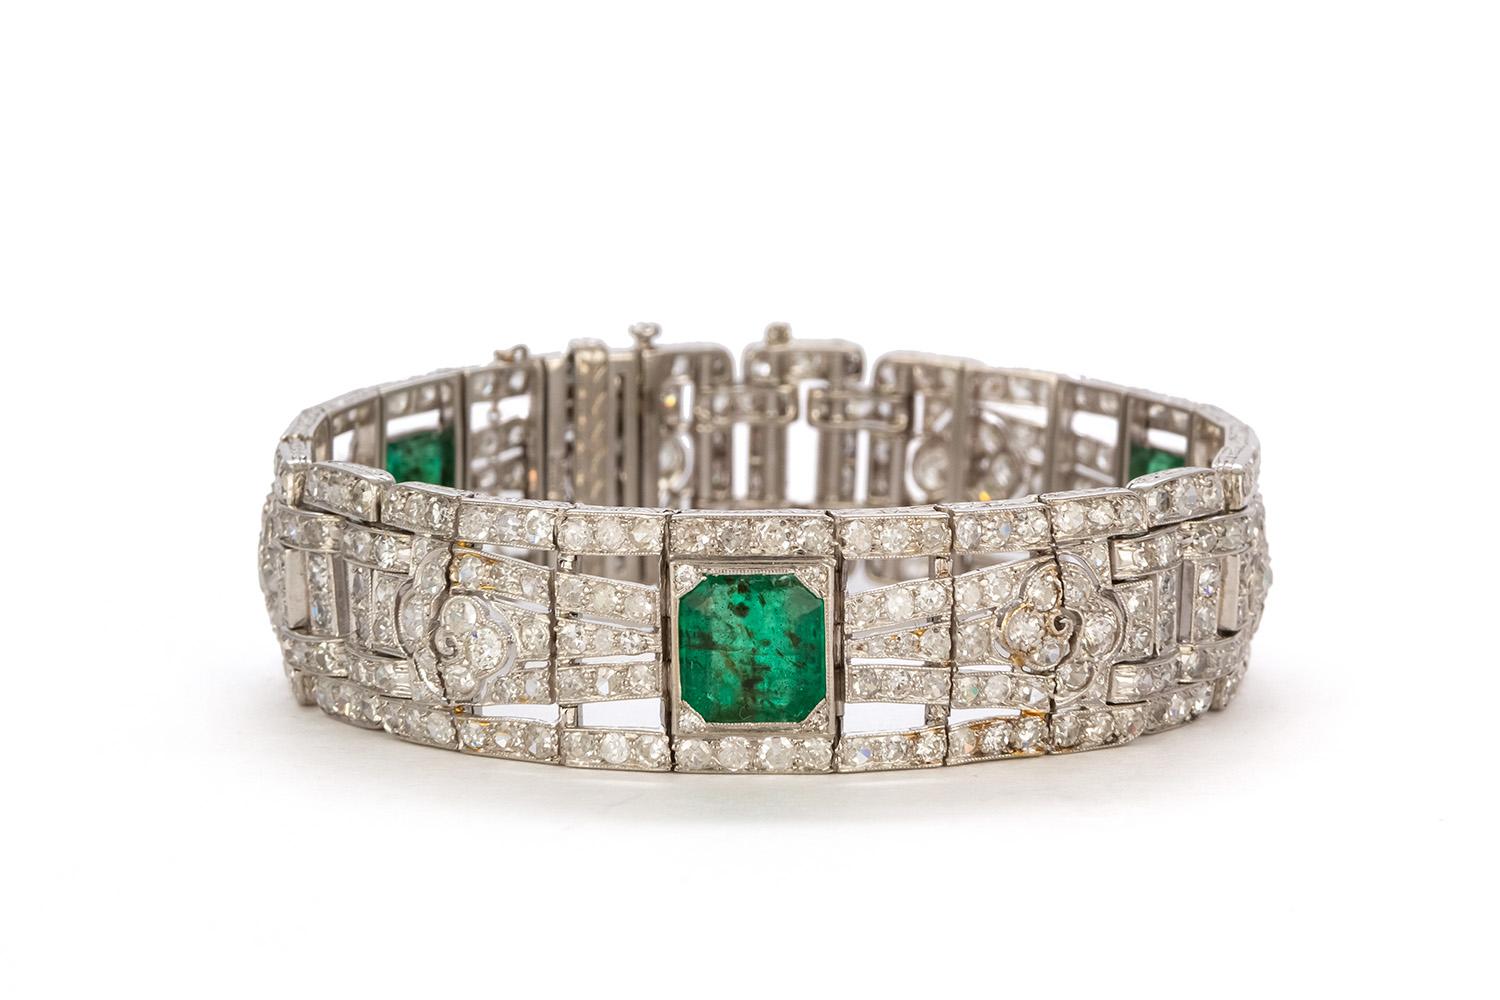 We are pleased to offer this Art Deco Platinum Natural Emerald & Diamond Bracelet. This stunning bracelet feature an estimated 3.50ctw natural emerald accented by approximately 12.00ctw round brilliant cut diamonds all set in a vintage art deco